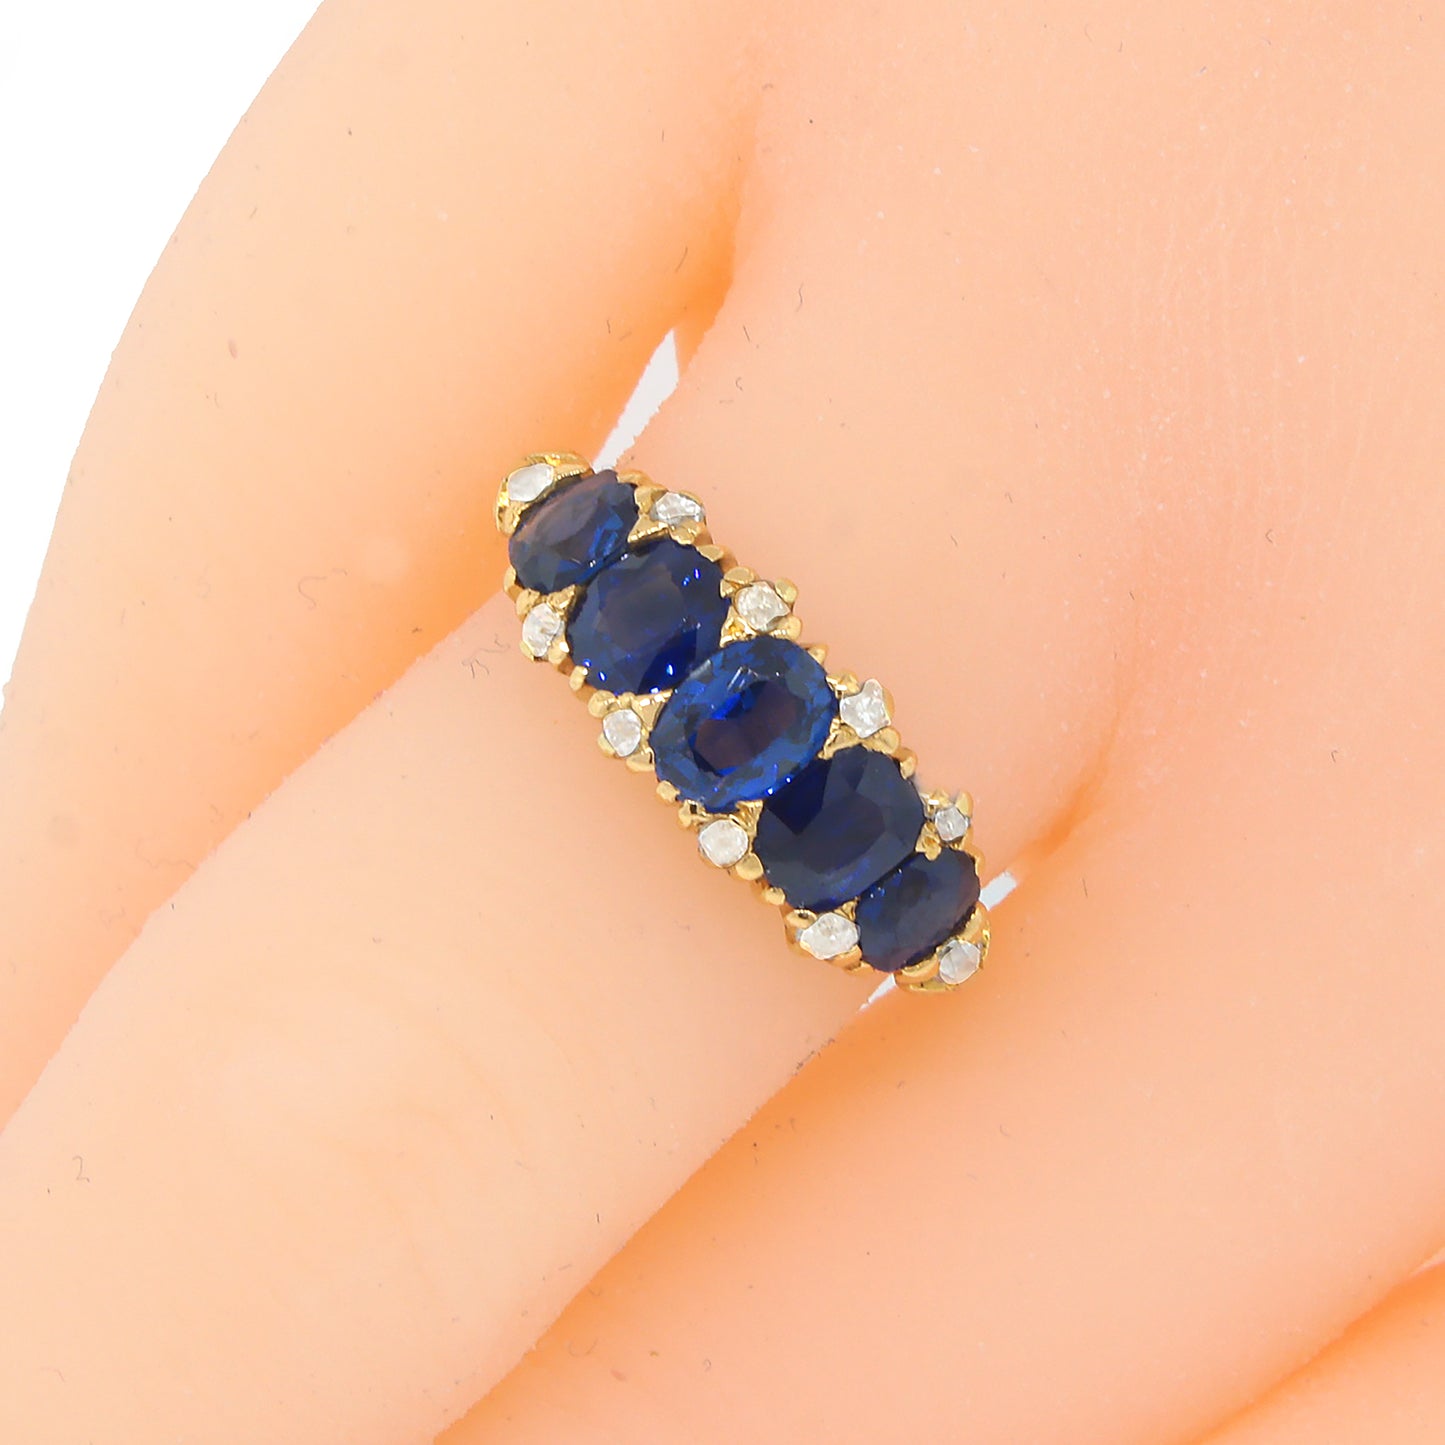 GIA Certified No-Heat Sapphire and Diamond Ring